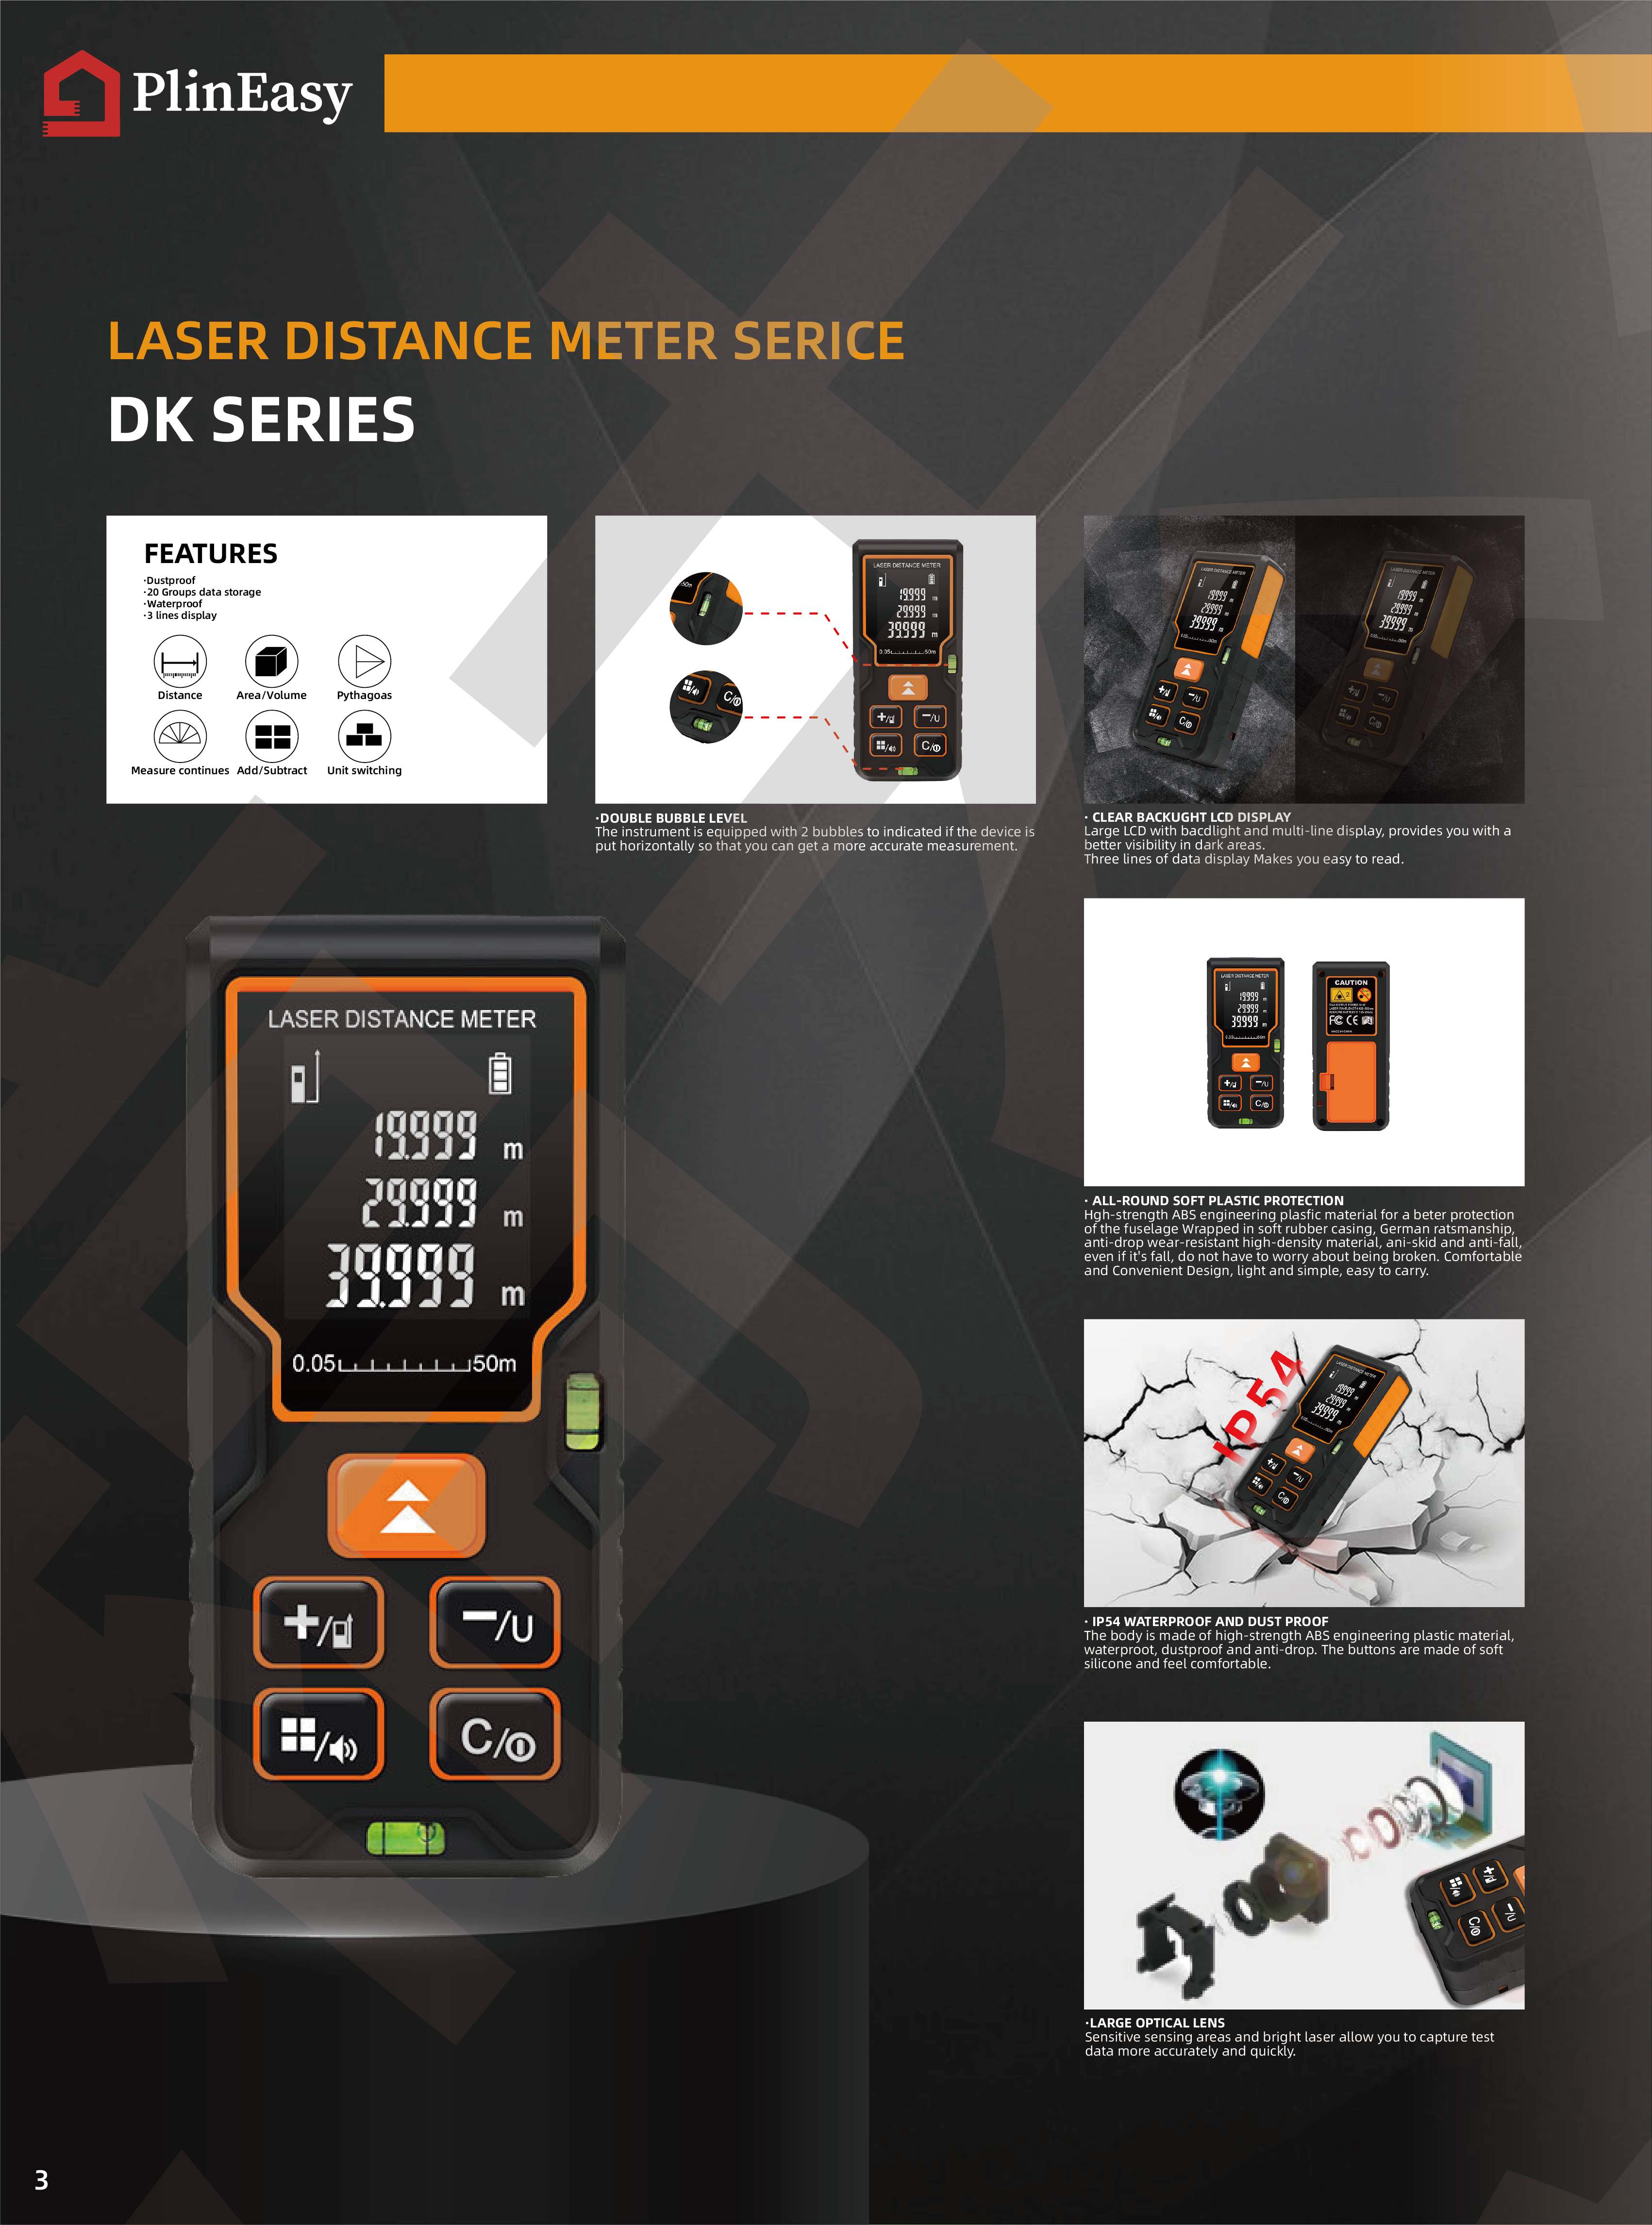 Multifuctions of Laser Distance Meter DK50